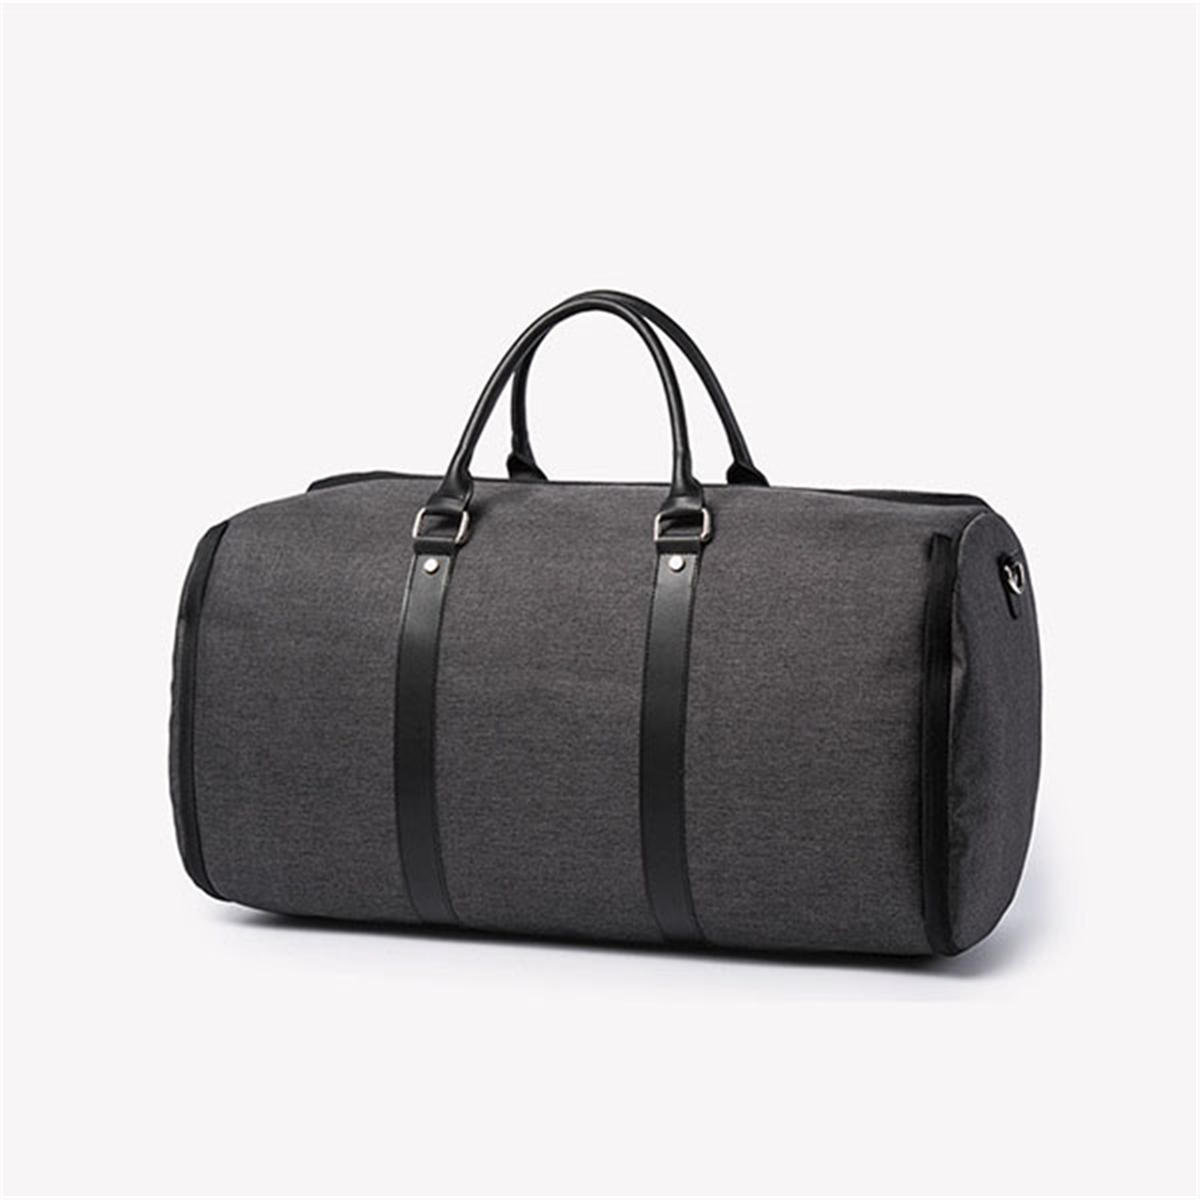 Men 2 in 1 outdoor business travel suit bag sports gym luggage clothing ...